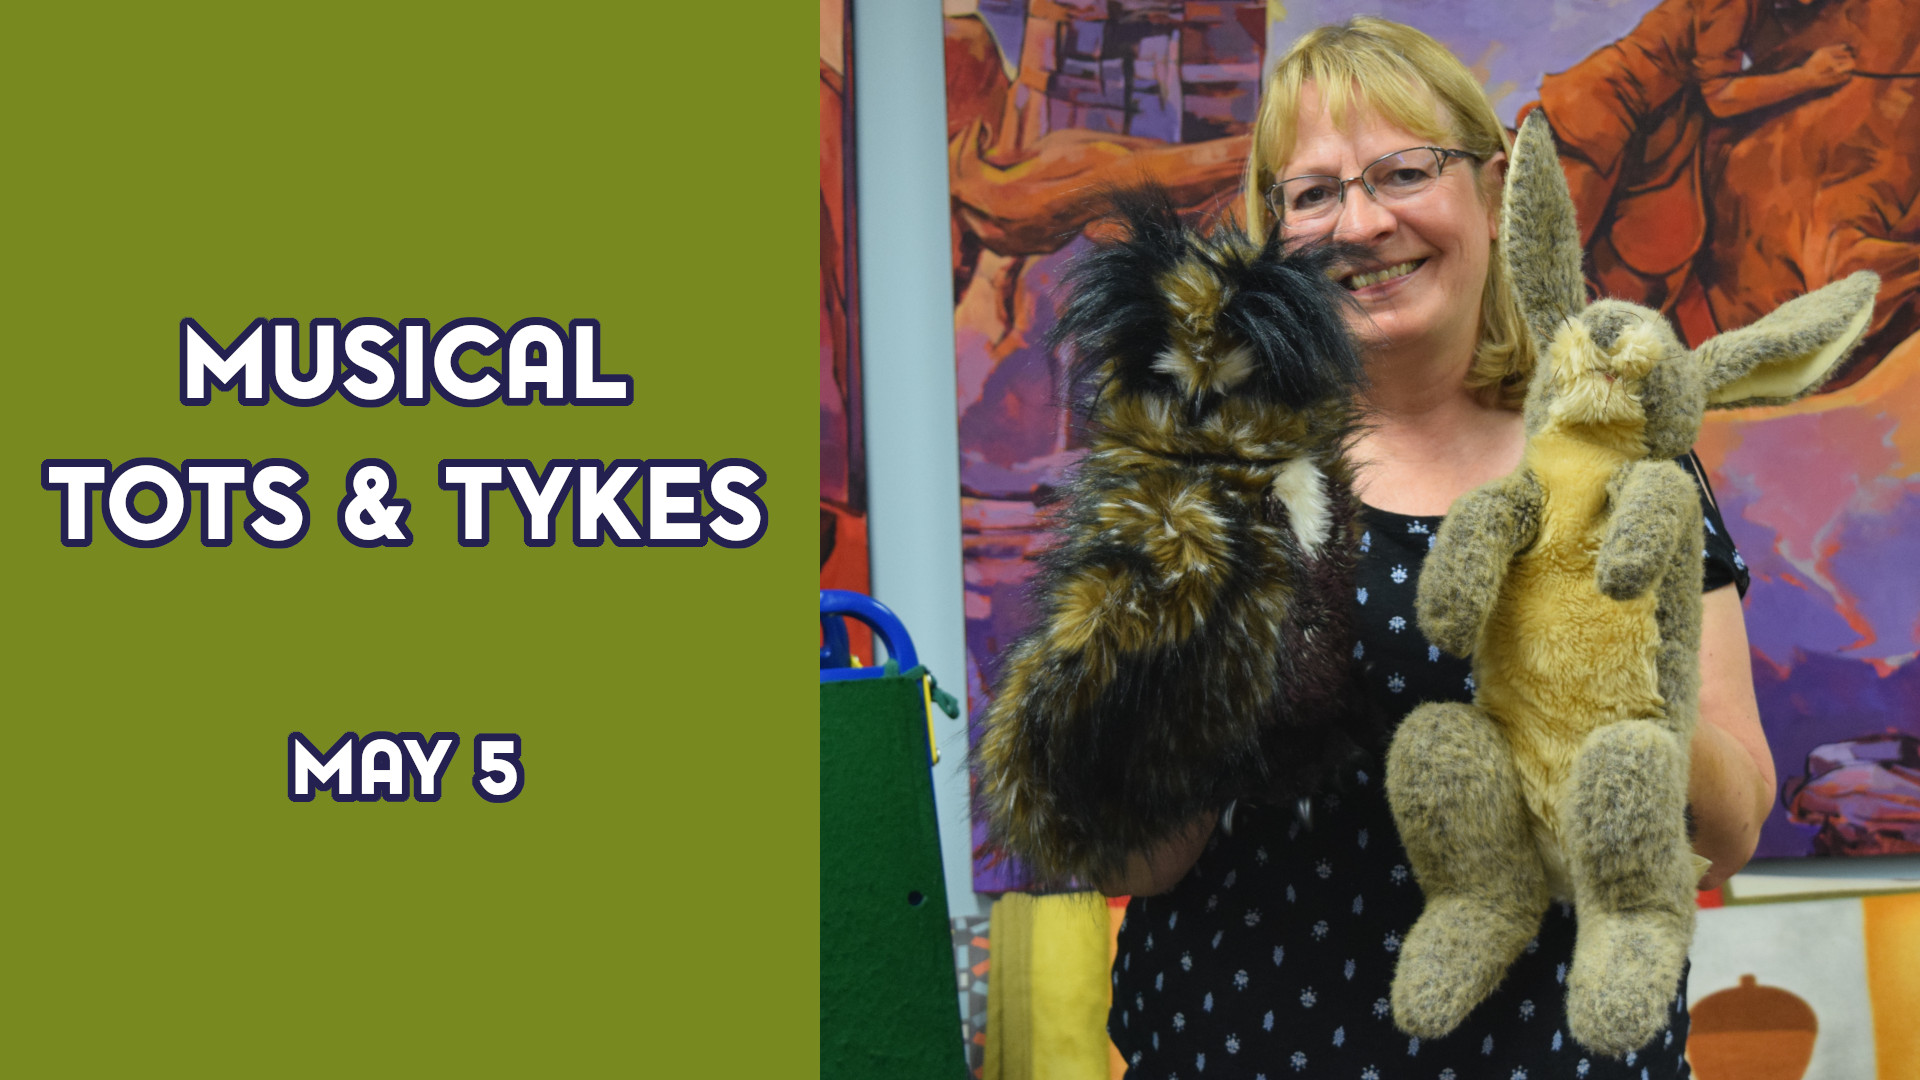 A woman holds stuffed animals next to the text "Musical Tots & Tykes May 5"